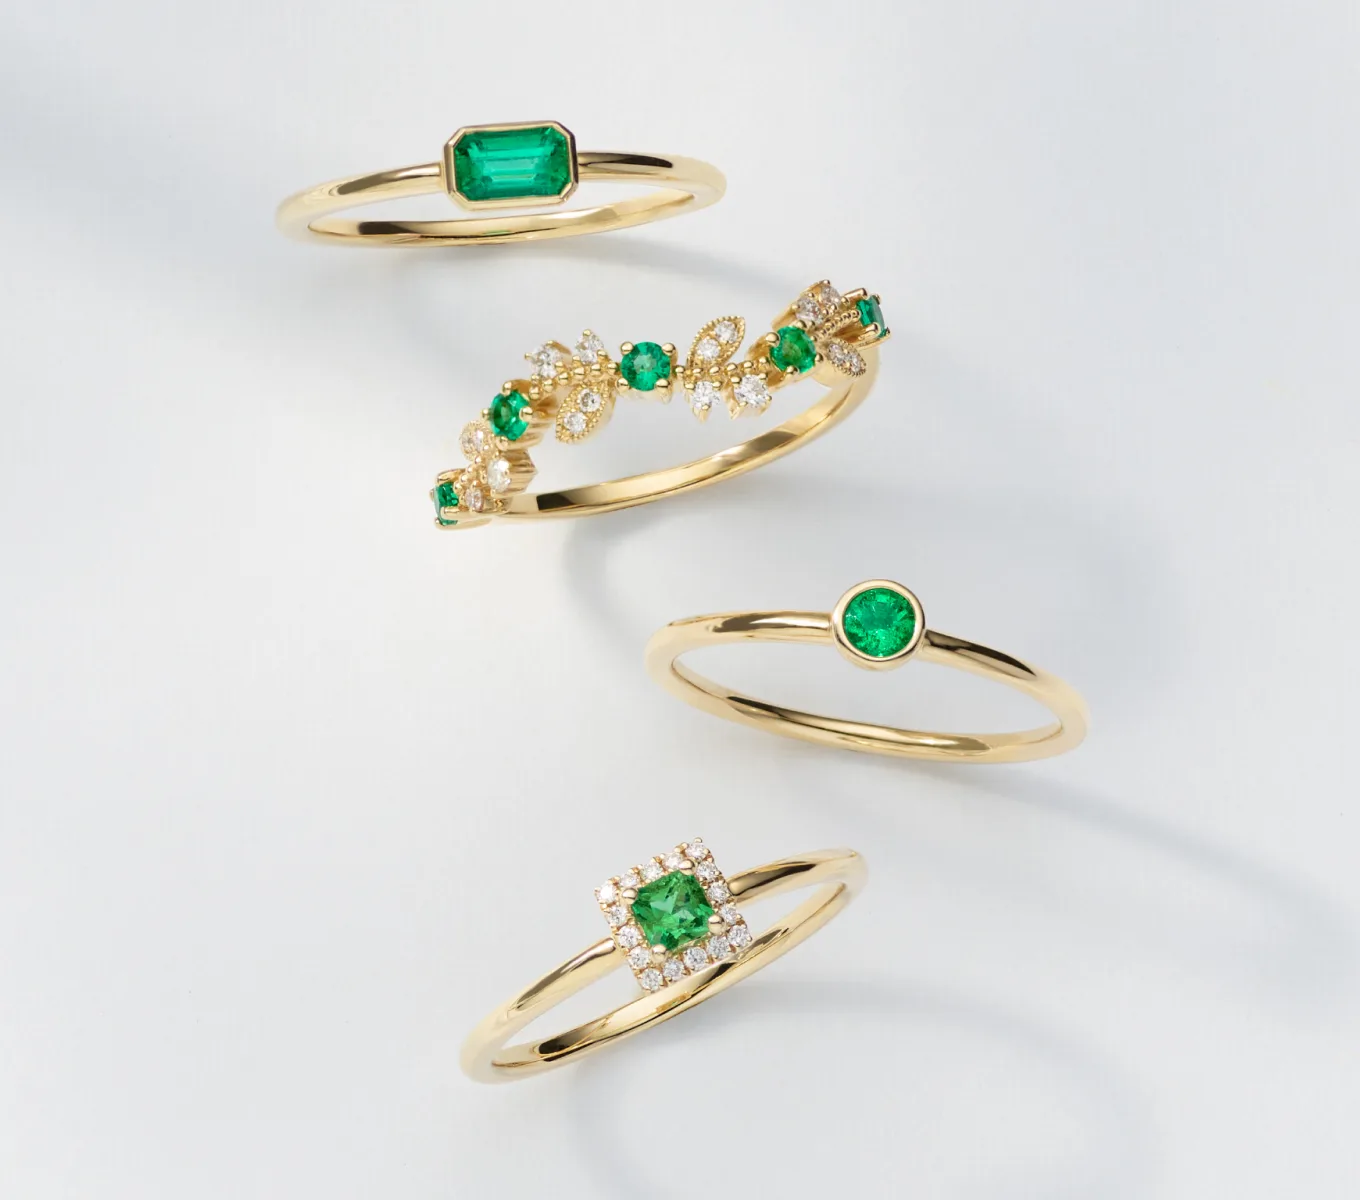 Zelena Bezel-Set Emerald Ring A natural emerald is the star of this beautiful bezel-set ring. A classic emerald cut showcases the emerald’s vibrant green color, while warm 14-karat yellow gold makes the perfect complement. Wear this ring alone, or stack it with favorites. To care for natural emeralds, gently clean with mild soapy water and a soft cloth. Avoid harsh chemicals, ultrasonic jewelry cleaners, and extreme temperature changes. Bryony Emerald & Diamond Ring Natural diamonds and emeralds decorate the beautiful vine-like design of this 14-karat yellow gold ring. It features delicate milgrain detail for a vintage-inspired touch. To care for natural emeralds, gently clean with mild soapy water and a soft cloth. Avoid harsh chemicals, ultrasonic jewelry cleaners, and extreme temperature changes. Elowen Bezel-Set Emerald Ring Add a petite pop of color to any look with this natural emerald ring. Crafted in warm 14-karat yellow gold, it features a stylish bezel setting. Wear it solo, or add it to your favorite ring stack. To care for natural emeralds, gently clean with mild soapy water and a soft cloth. Avoid harsh chemicals, ultrasonic jewelry cleaners, and extreme temperature changes. Quadra Emerald & Diamond Halo Ring A halo of natural diamonds complements the unique square shape of the natural emerald at the center of this ring. Crafted in warm 14-karat yellow gold, it’s beautiful on its own or stacked with a few of your favorites. To care for natural emeralds, gently clean with mild soapy water and a soft cloth. Avoid harsh chemicals, ultrasonic jewelry cleaners, and extreme temperature changes.